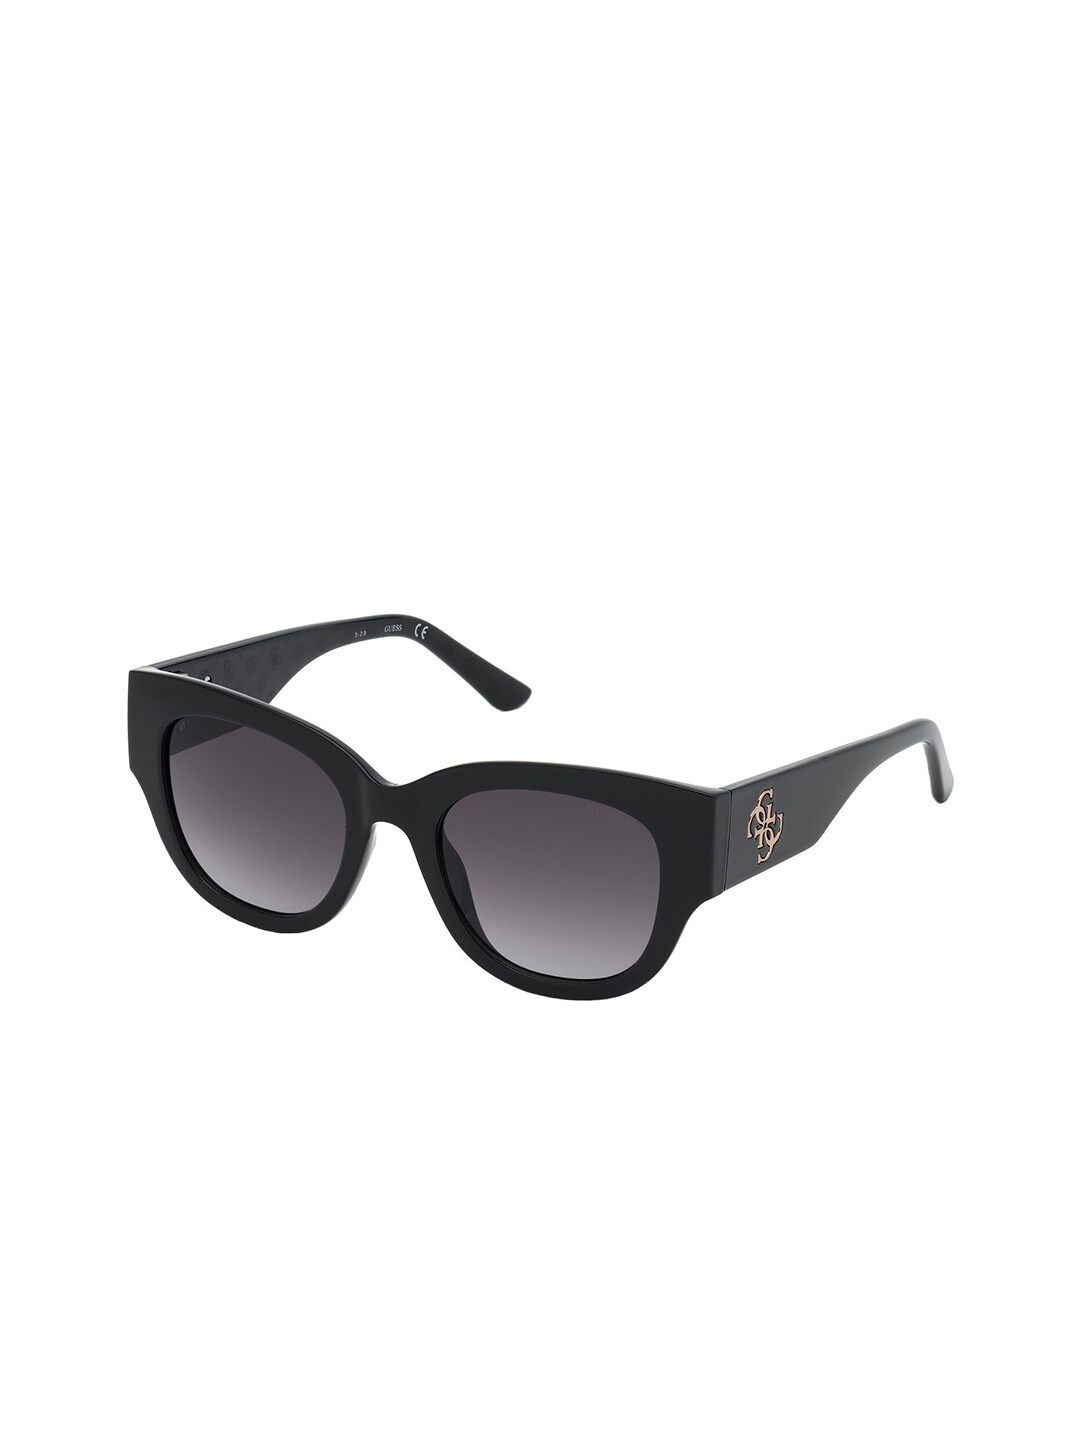 GUESS Women Grey Lens & Black Wayfarer Sunglasses with UV Protected Lens Price in India